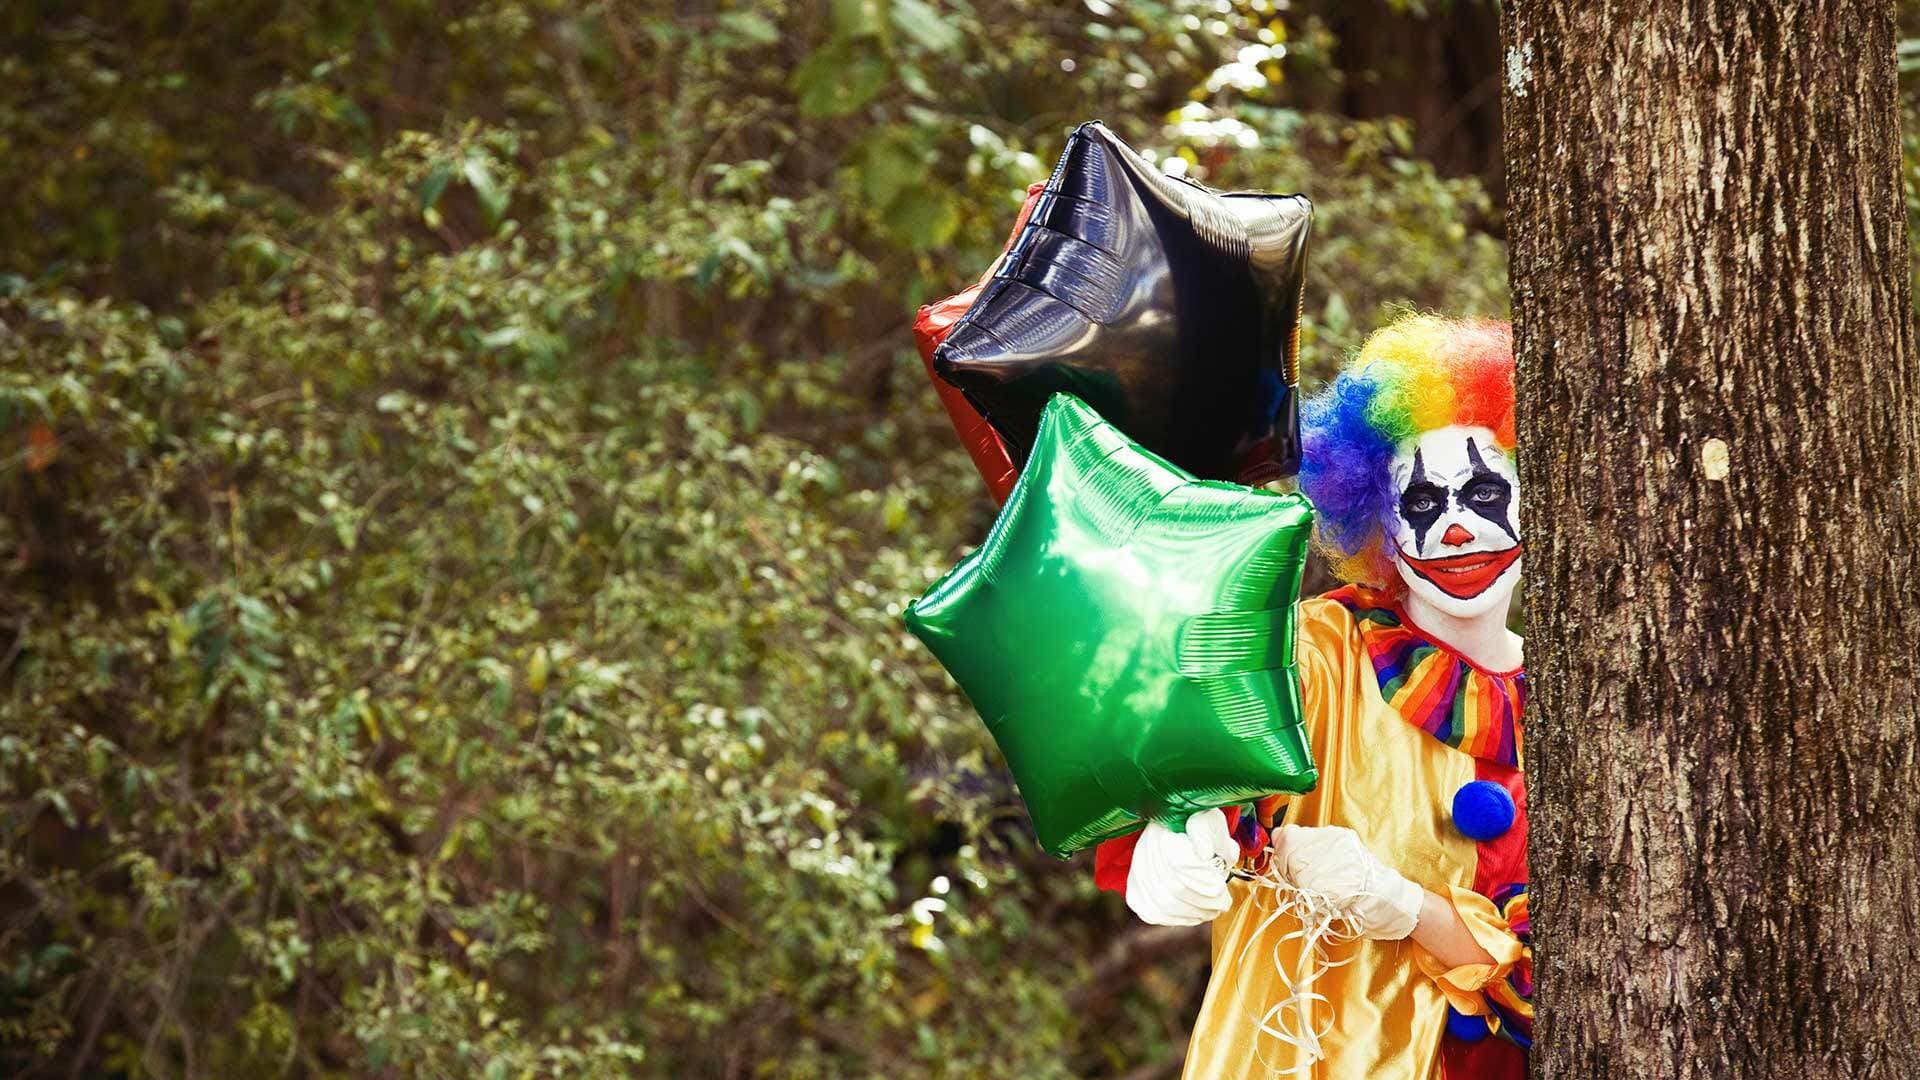 A clown holding balloons in the woods